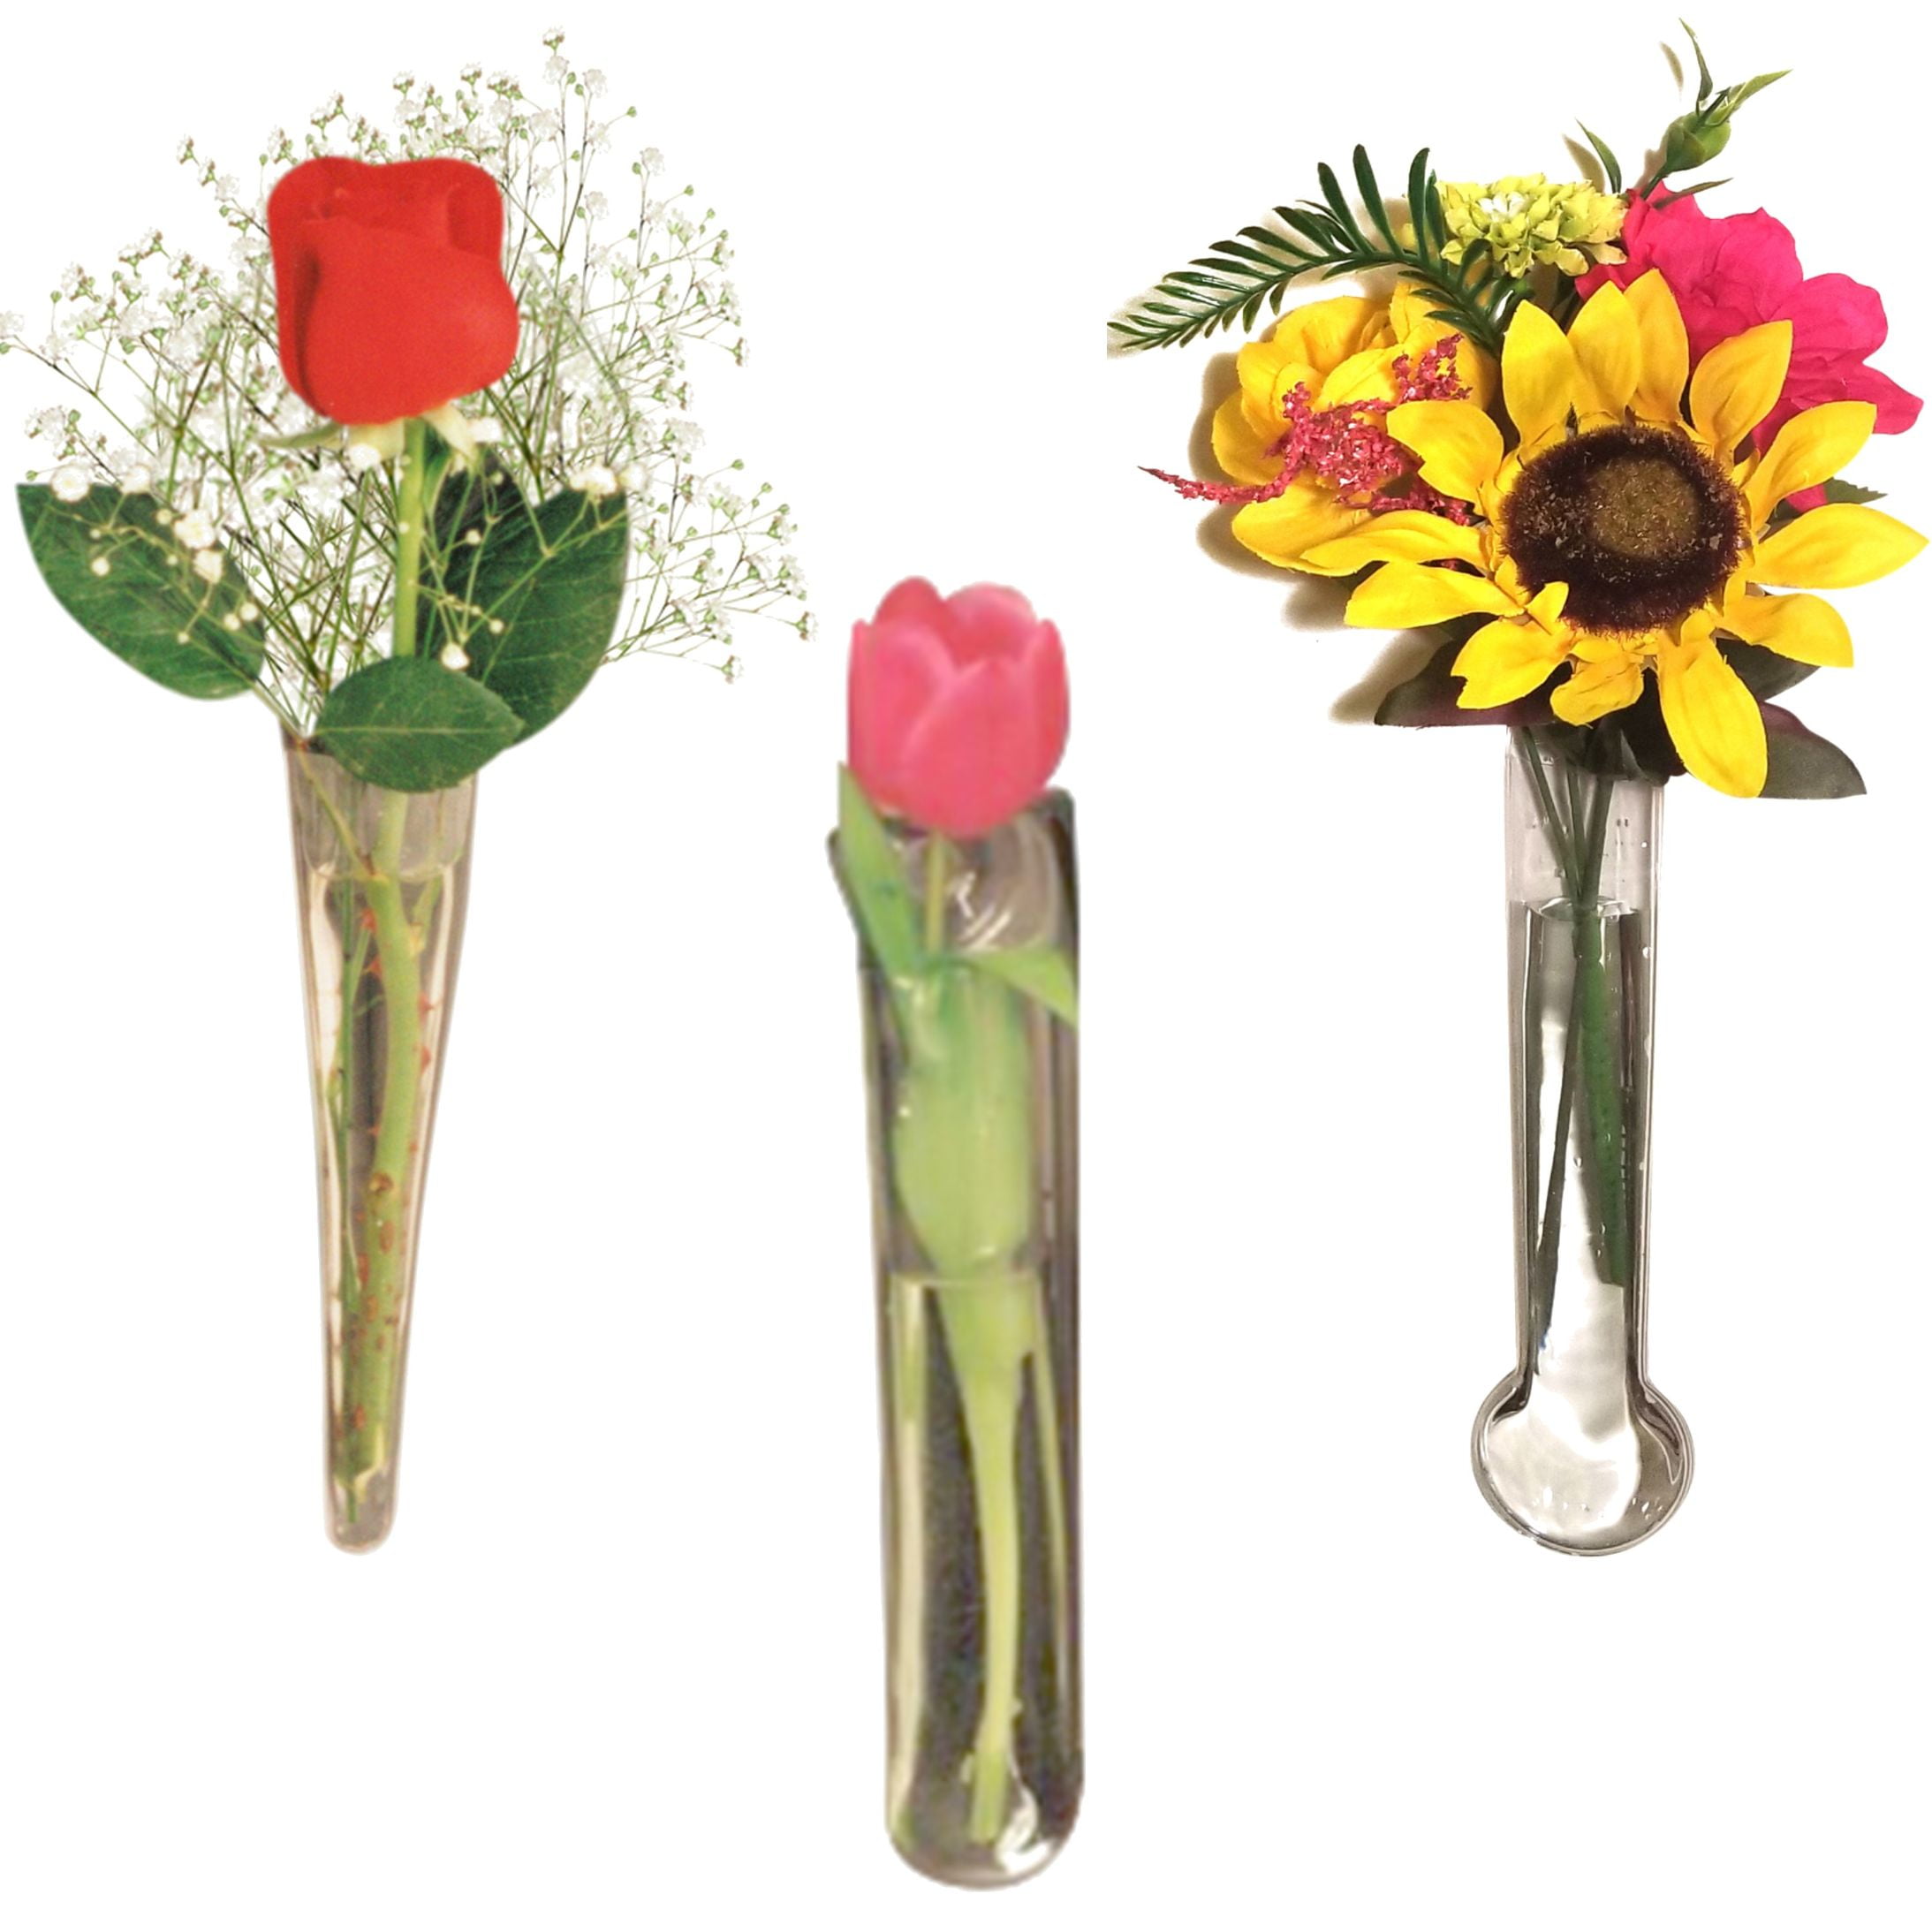 Suctions to Windows and Mirrors Holds Bouquet of Flower Stems and Water Gadjit Vinyl Window Vase Shaped Like a Flower Pot Clear Flexible Vinyl 